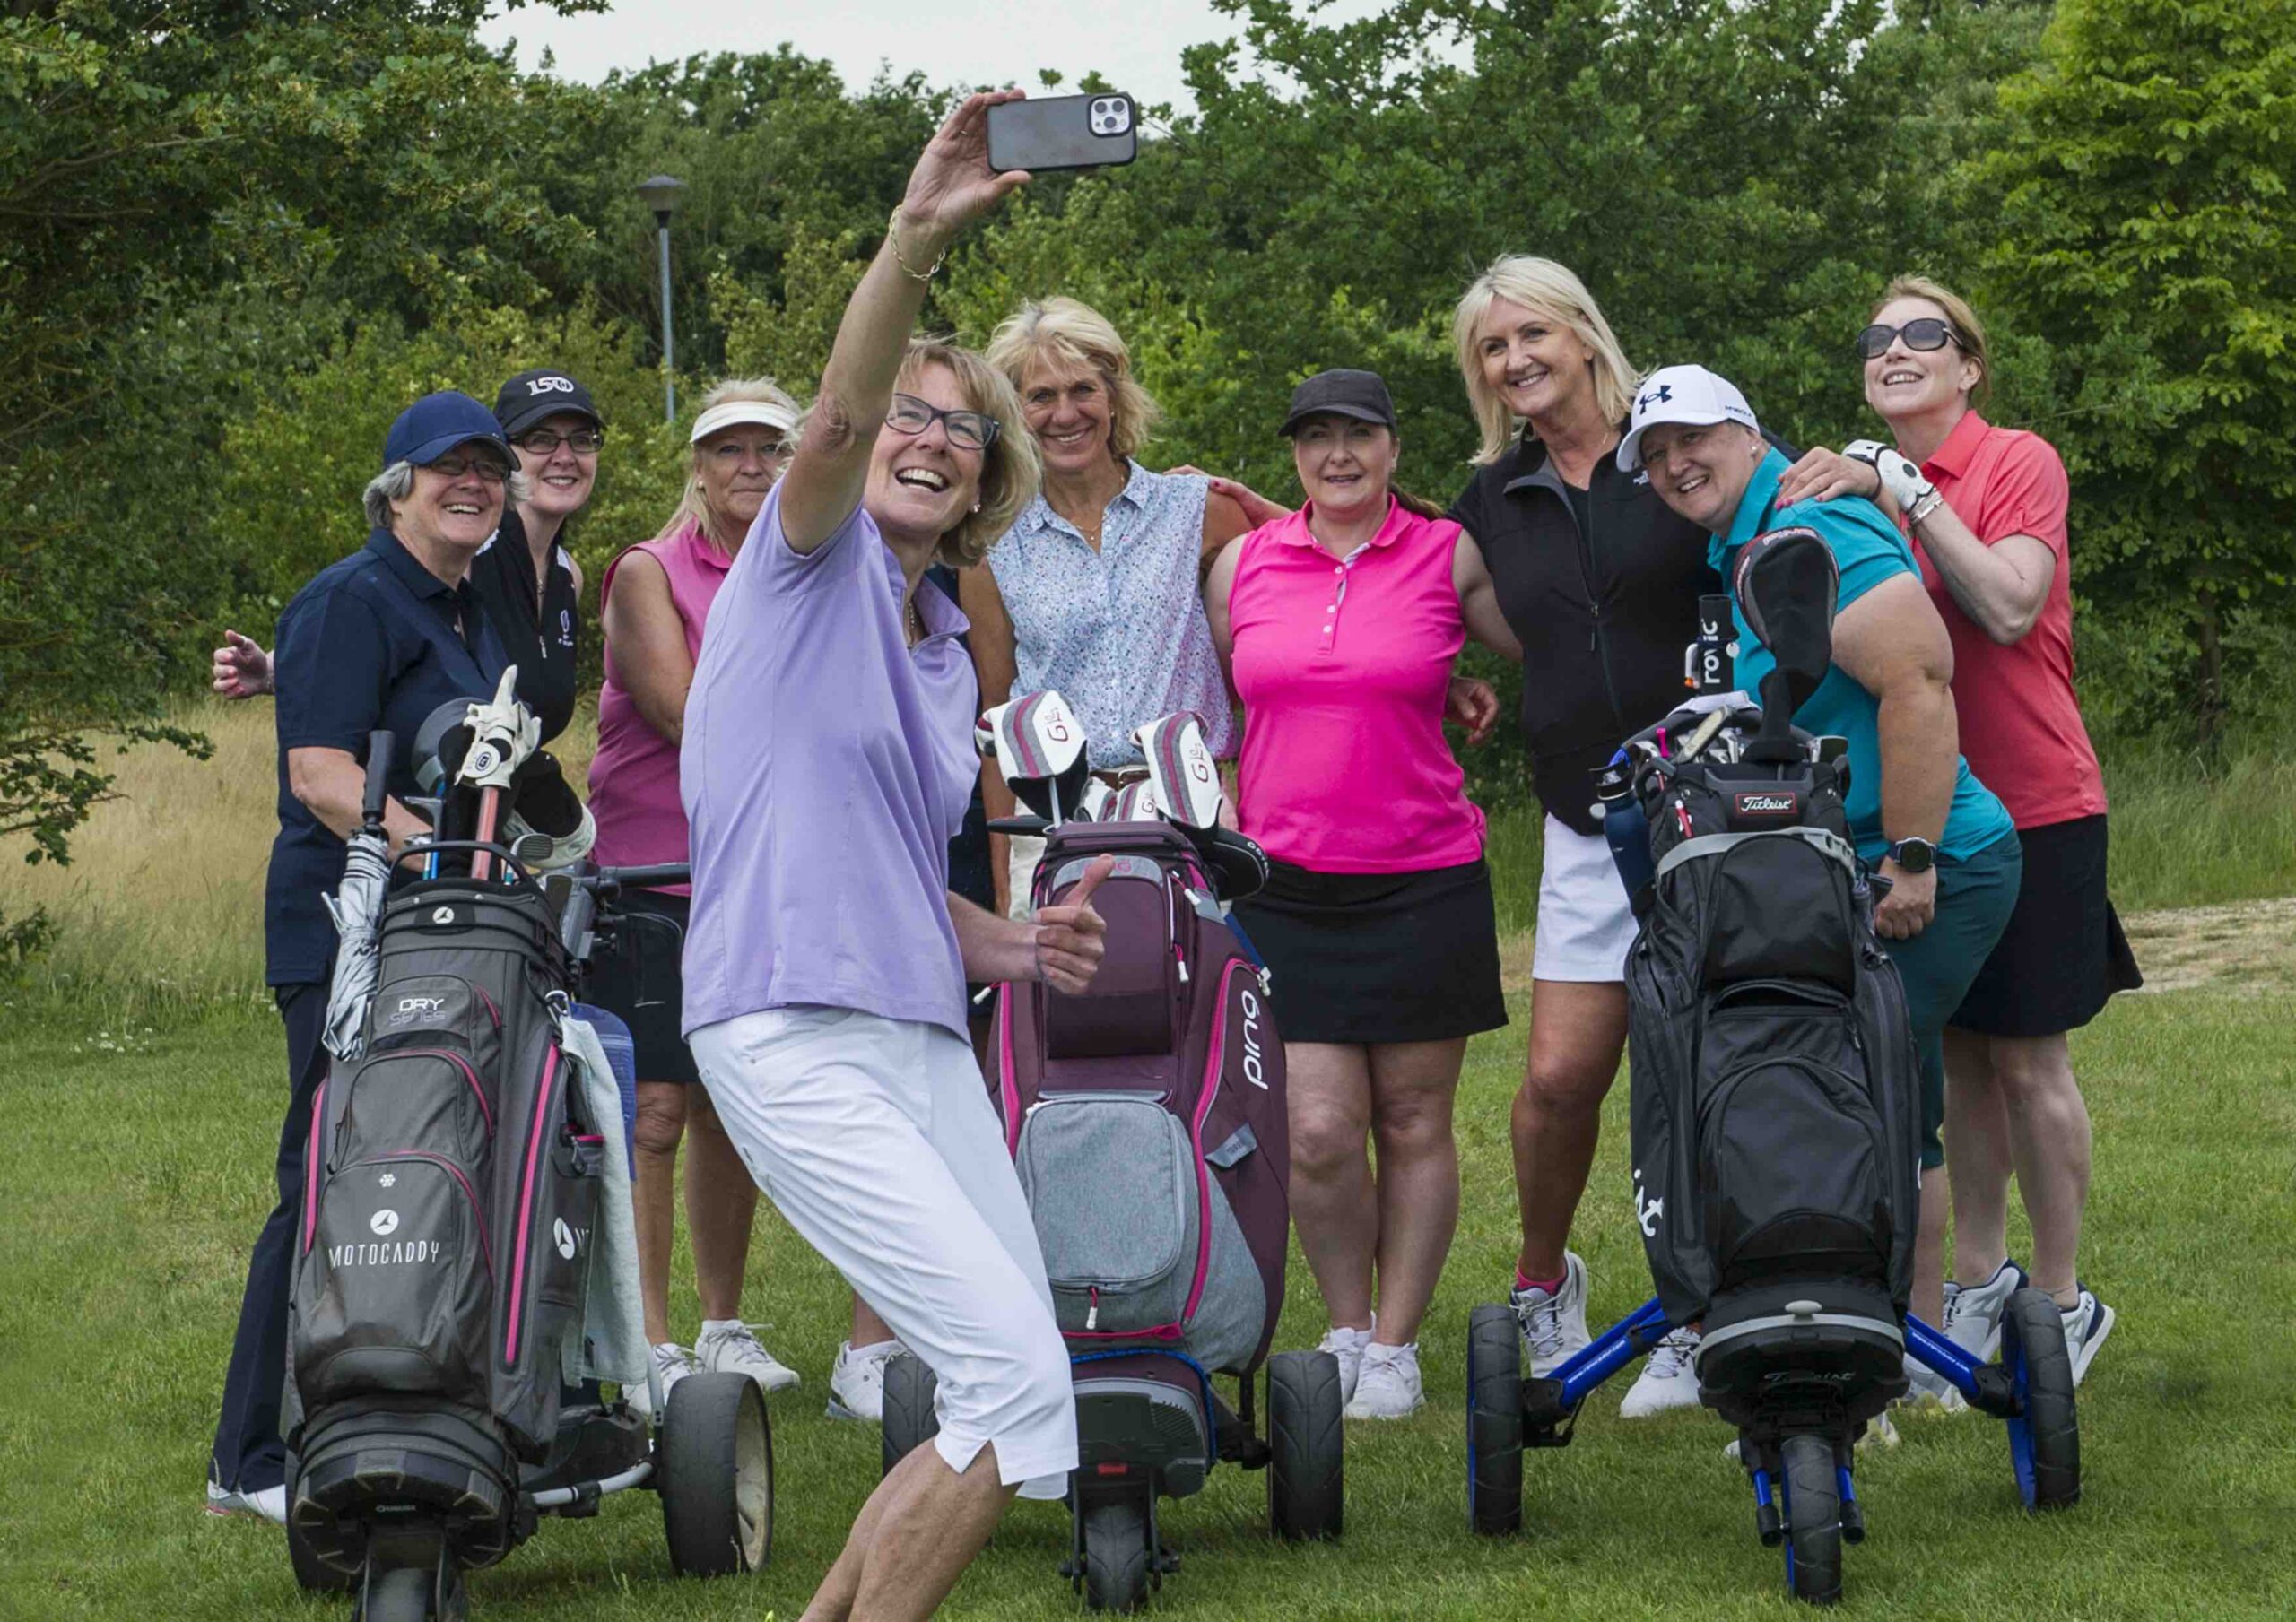 Sarah Bennett with some of the members of her Golfing Girls training programme